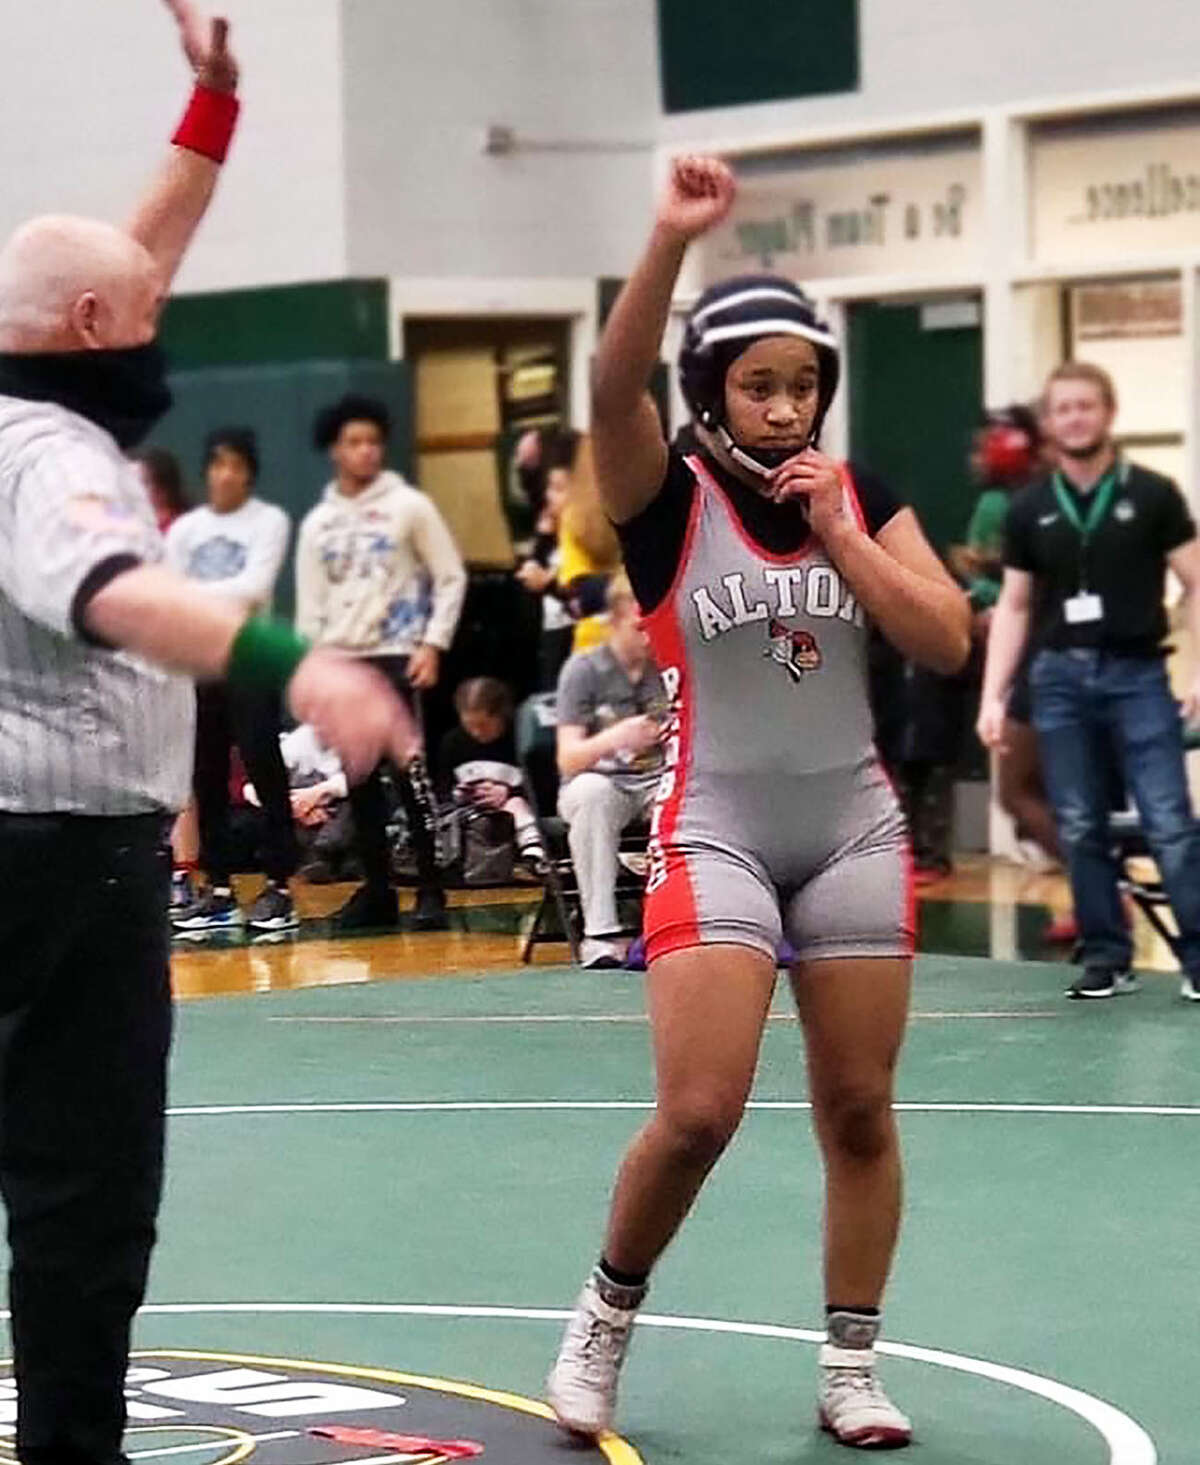 Alton's Antonia Phillips raises her fist after winning her school's first girls wrestling sectional title Saturday at the inaugural IHSA Girls Wrestling Sectional Tournament at Peoria Richwoods. Phillips defeated Savannah Hamilton of El Paso 6-0 in the championship bout at 140 pounds.